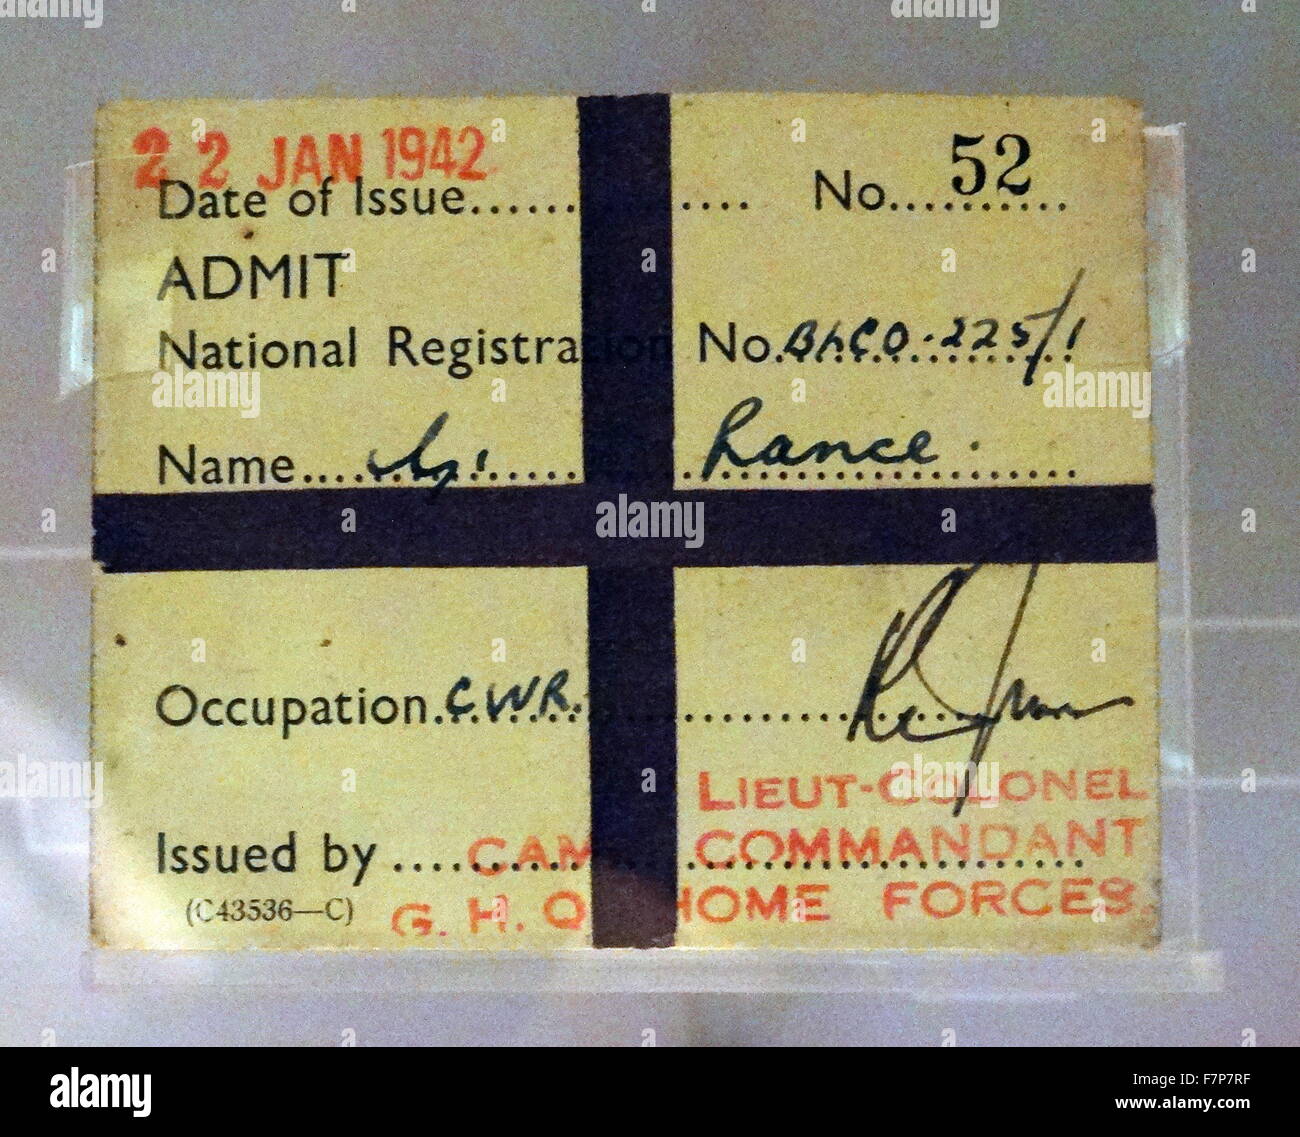 Identity document used as a pass by staff and officials in the Cabinet war rooms bunker, London; England. The War rooms were used by the British Government as protection for senior ministers during World war two. Stock Photo